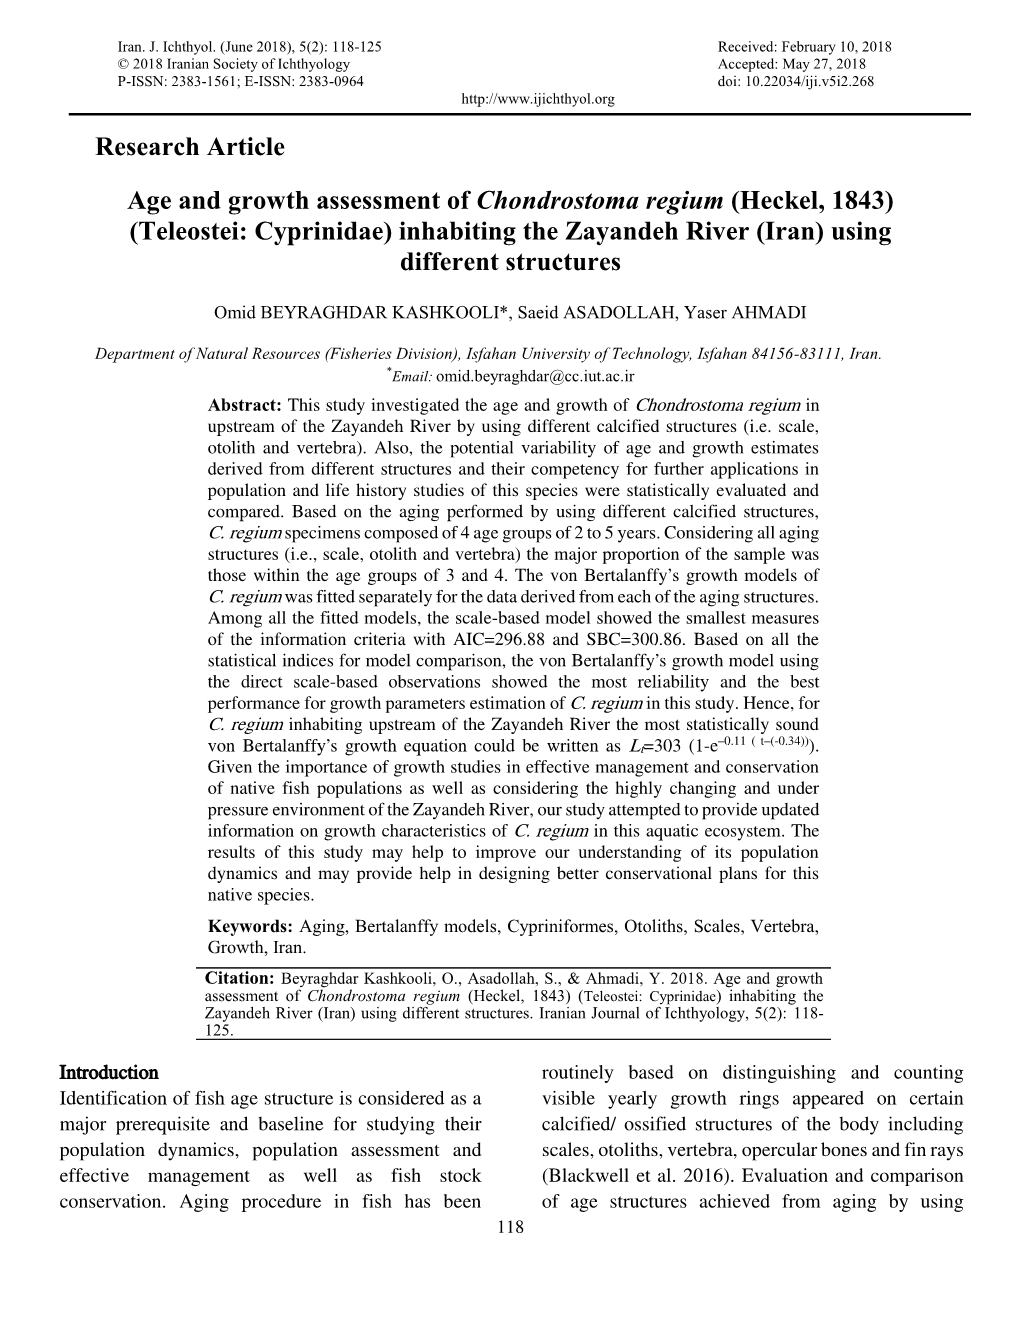 Research Article Age and Growth Assessment of Chondrostoma